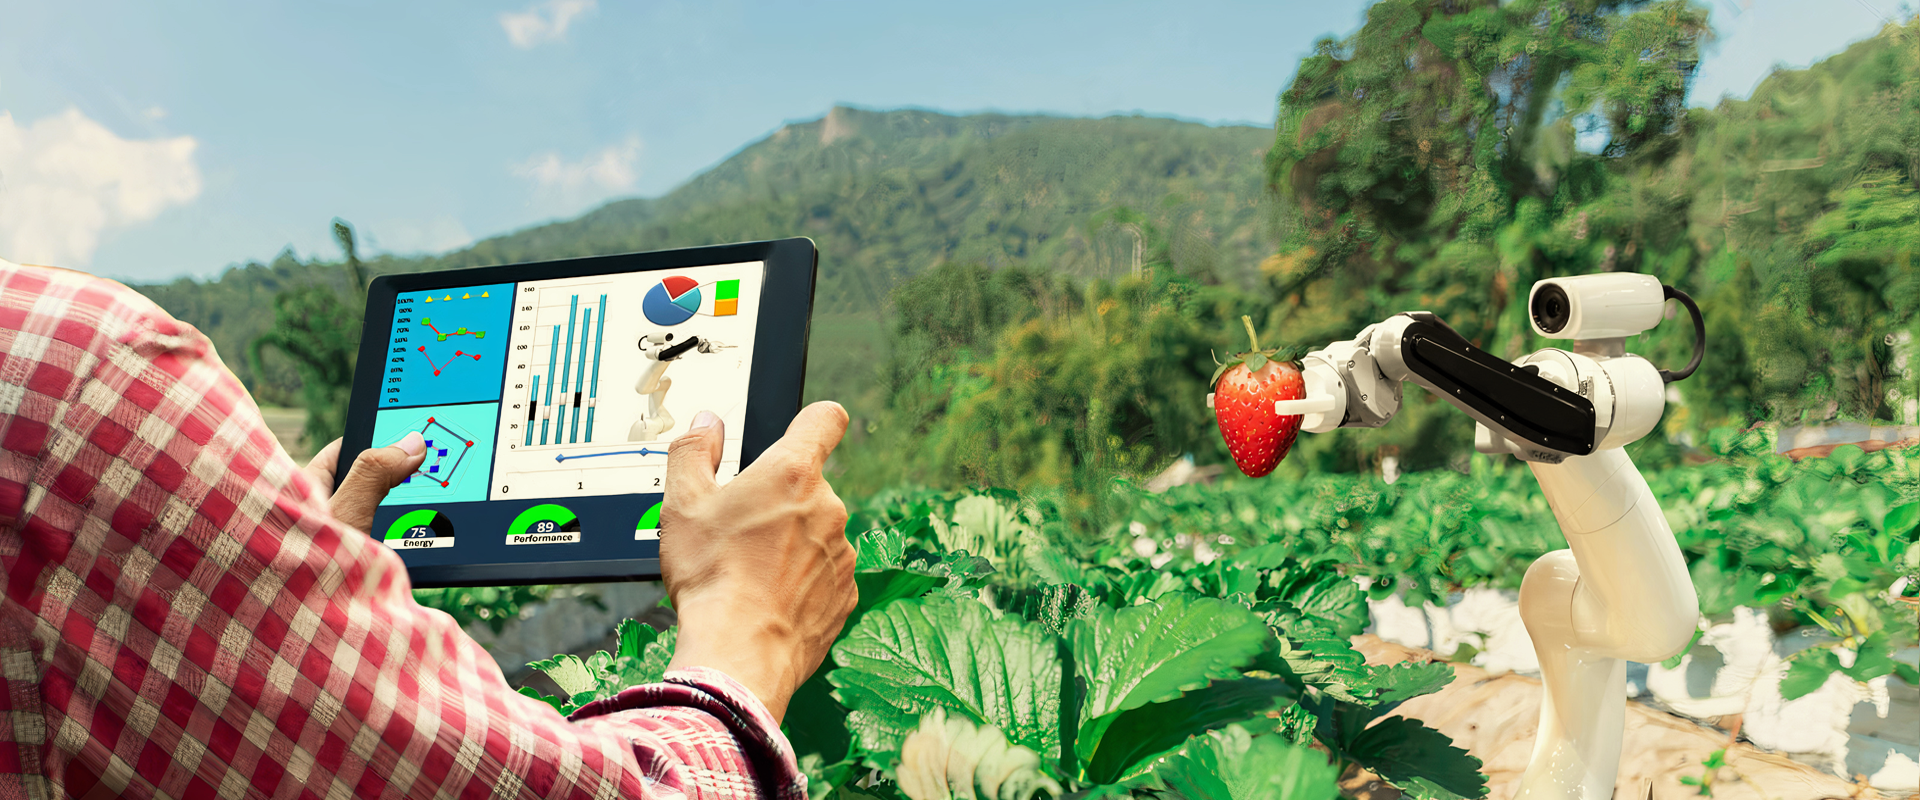 Automated farming systems that are changing the world of agriculture